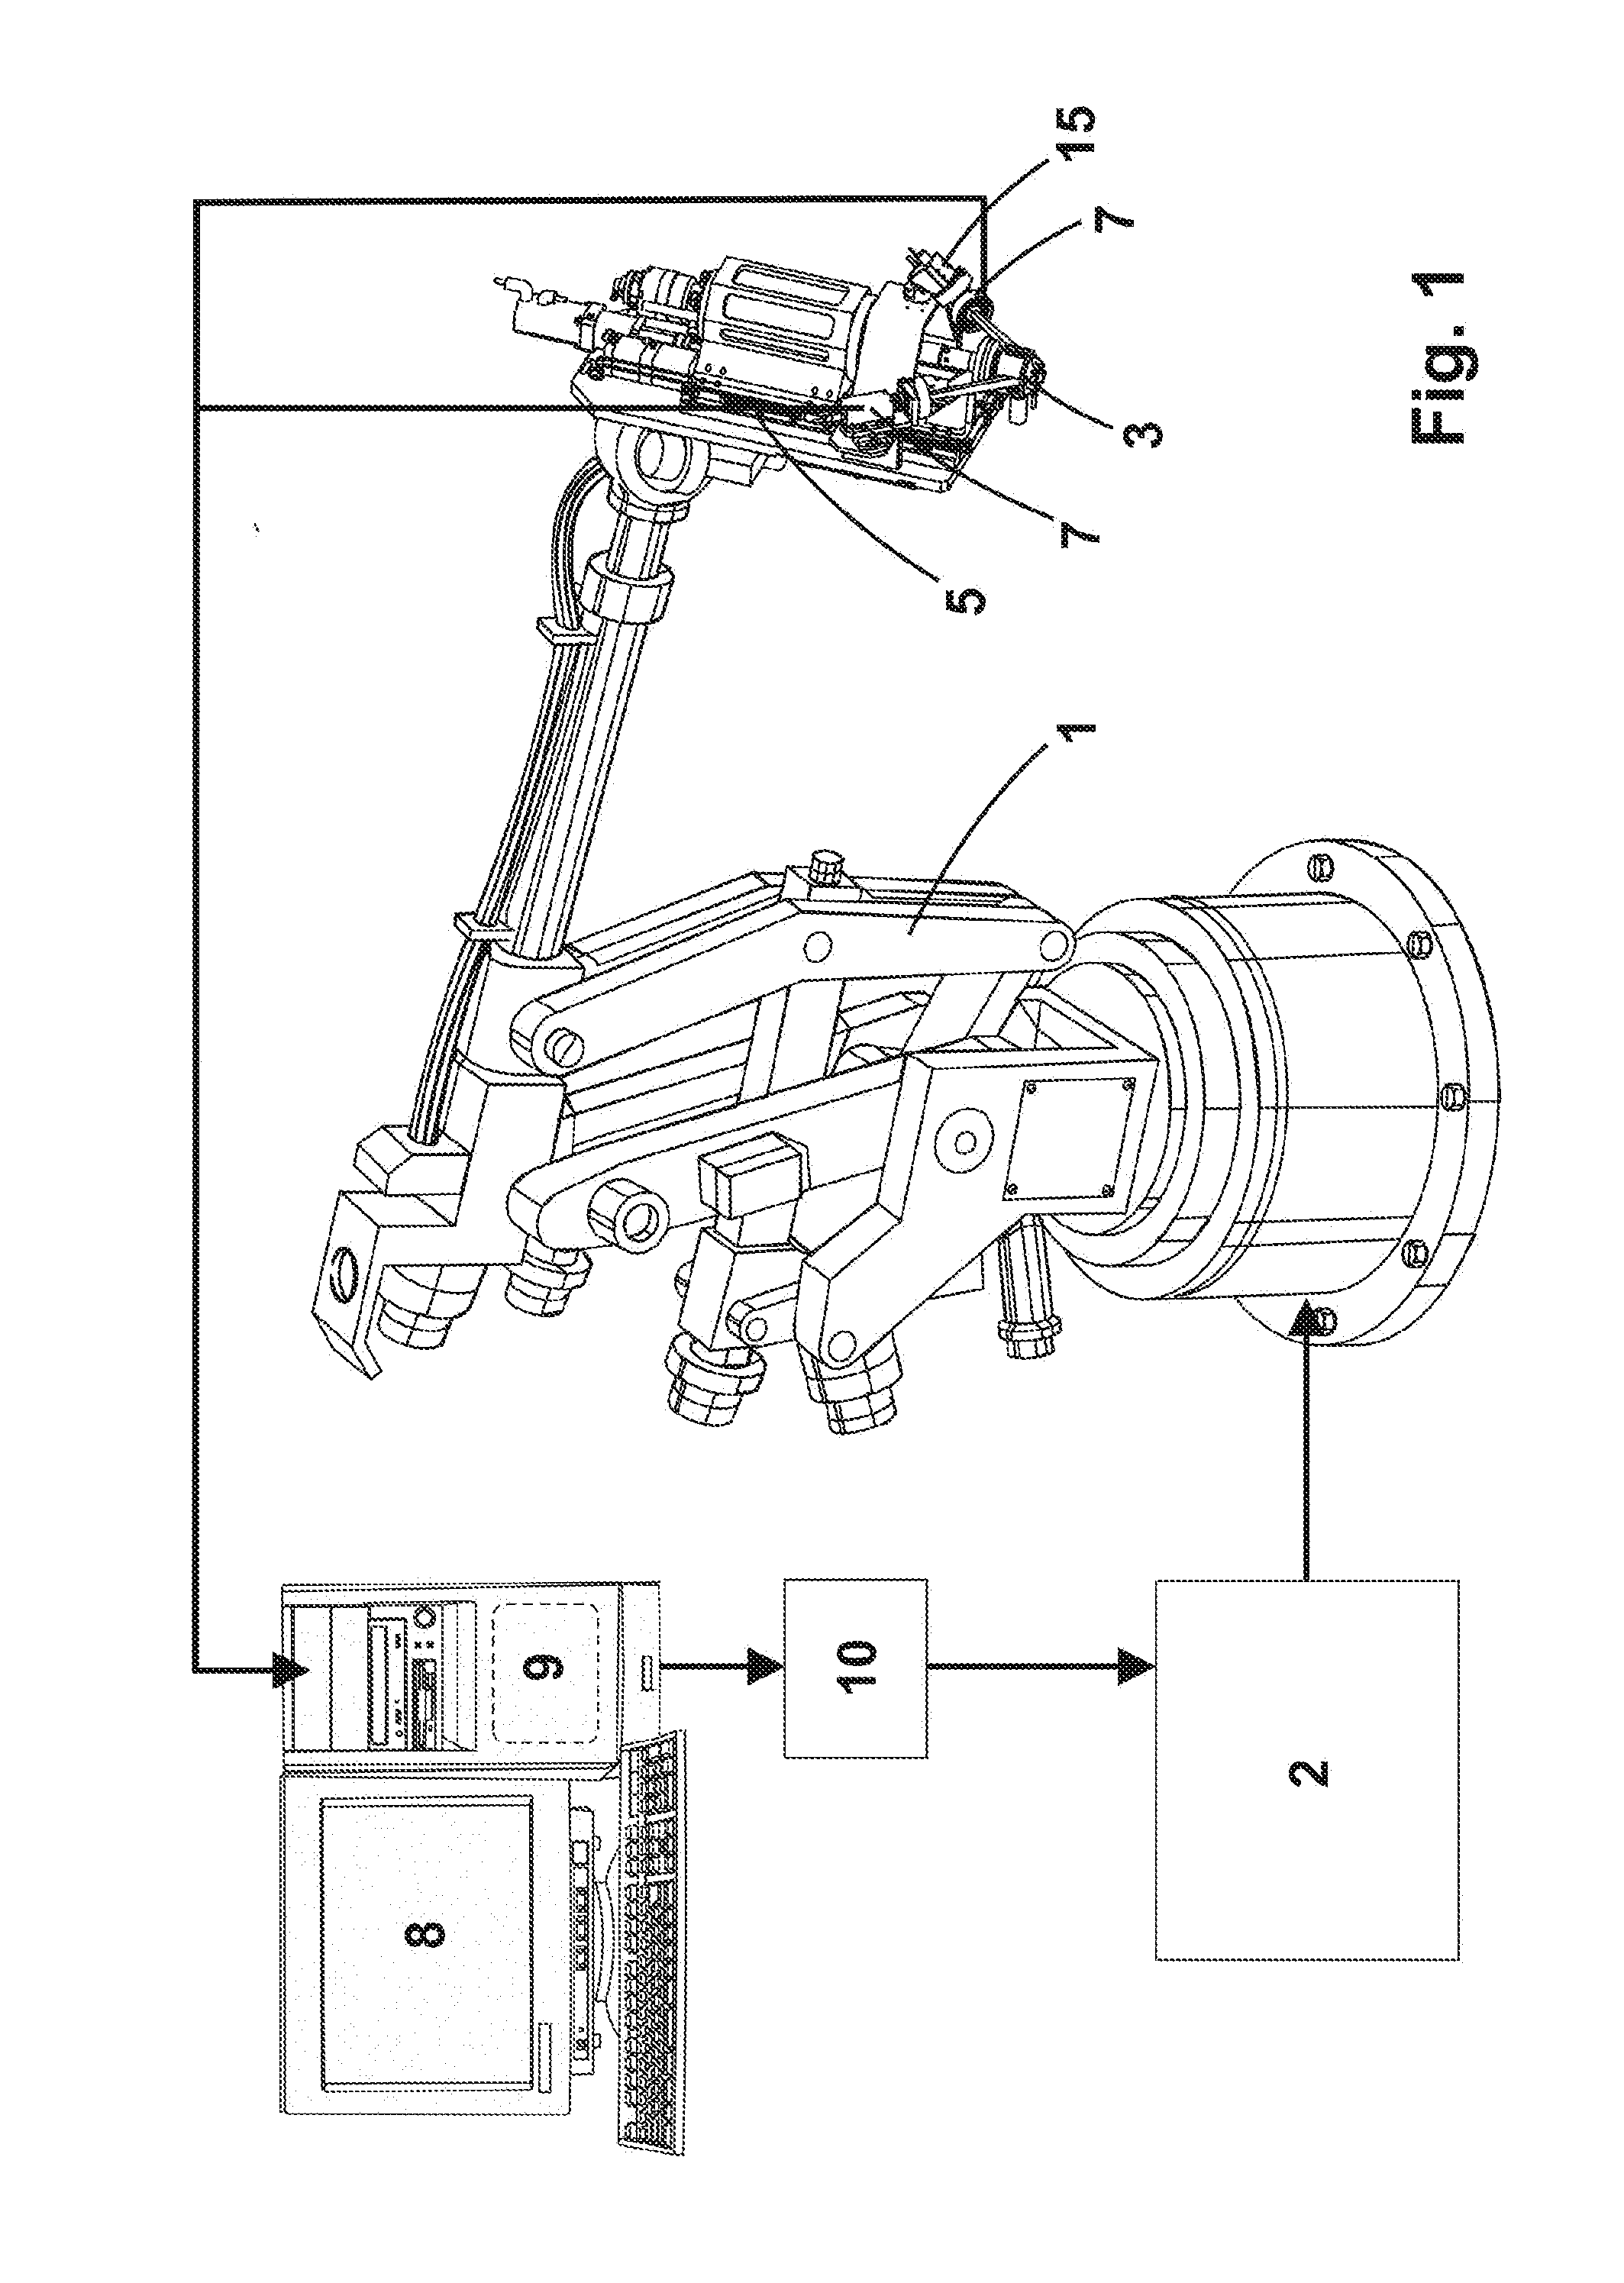 Head and automated mechanized method with vision